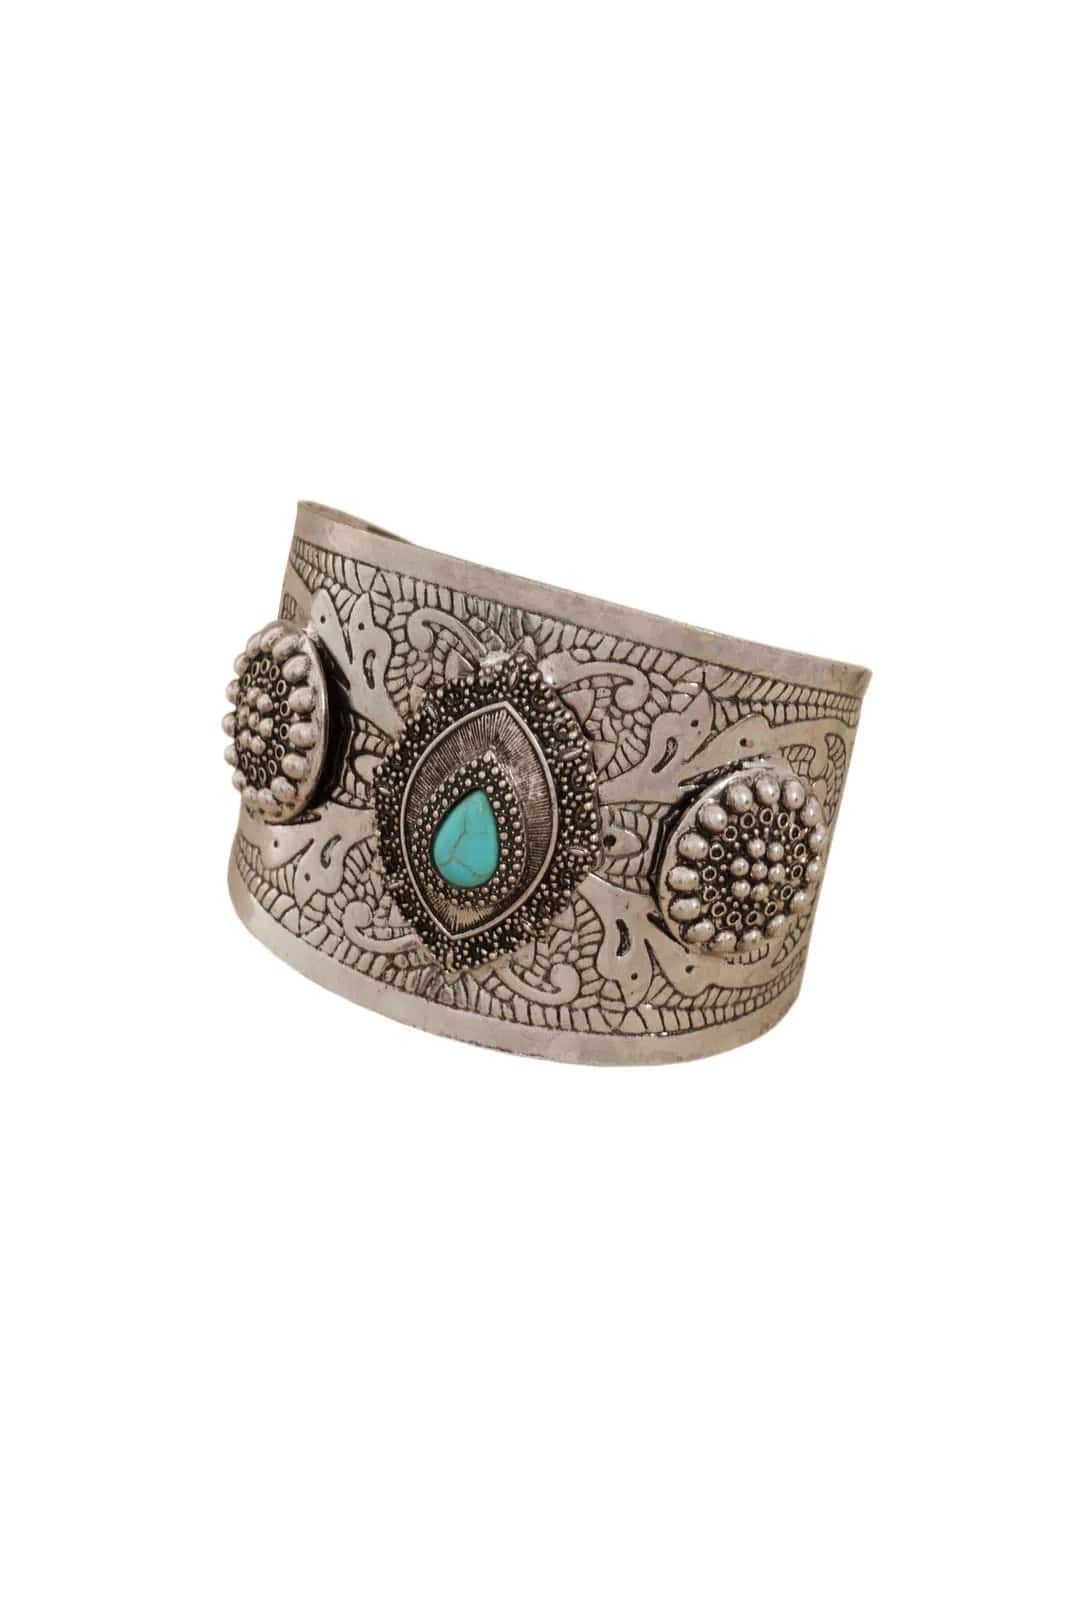 Boho Stone Teardrop Metal Cuff in Silver by Adorne, available for rent